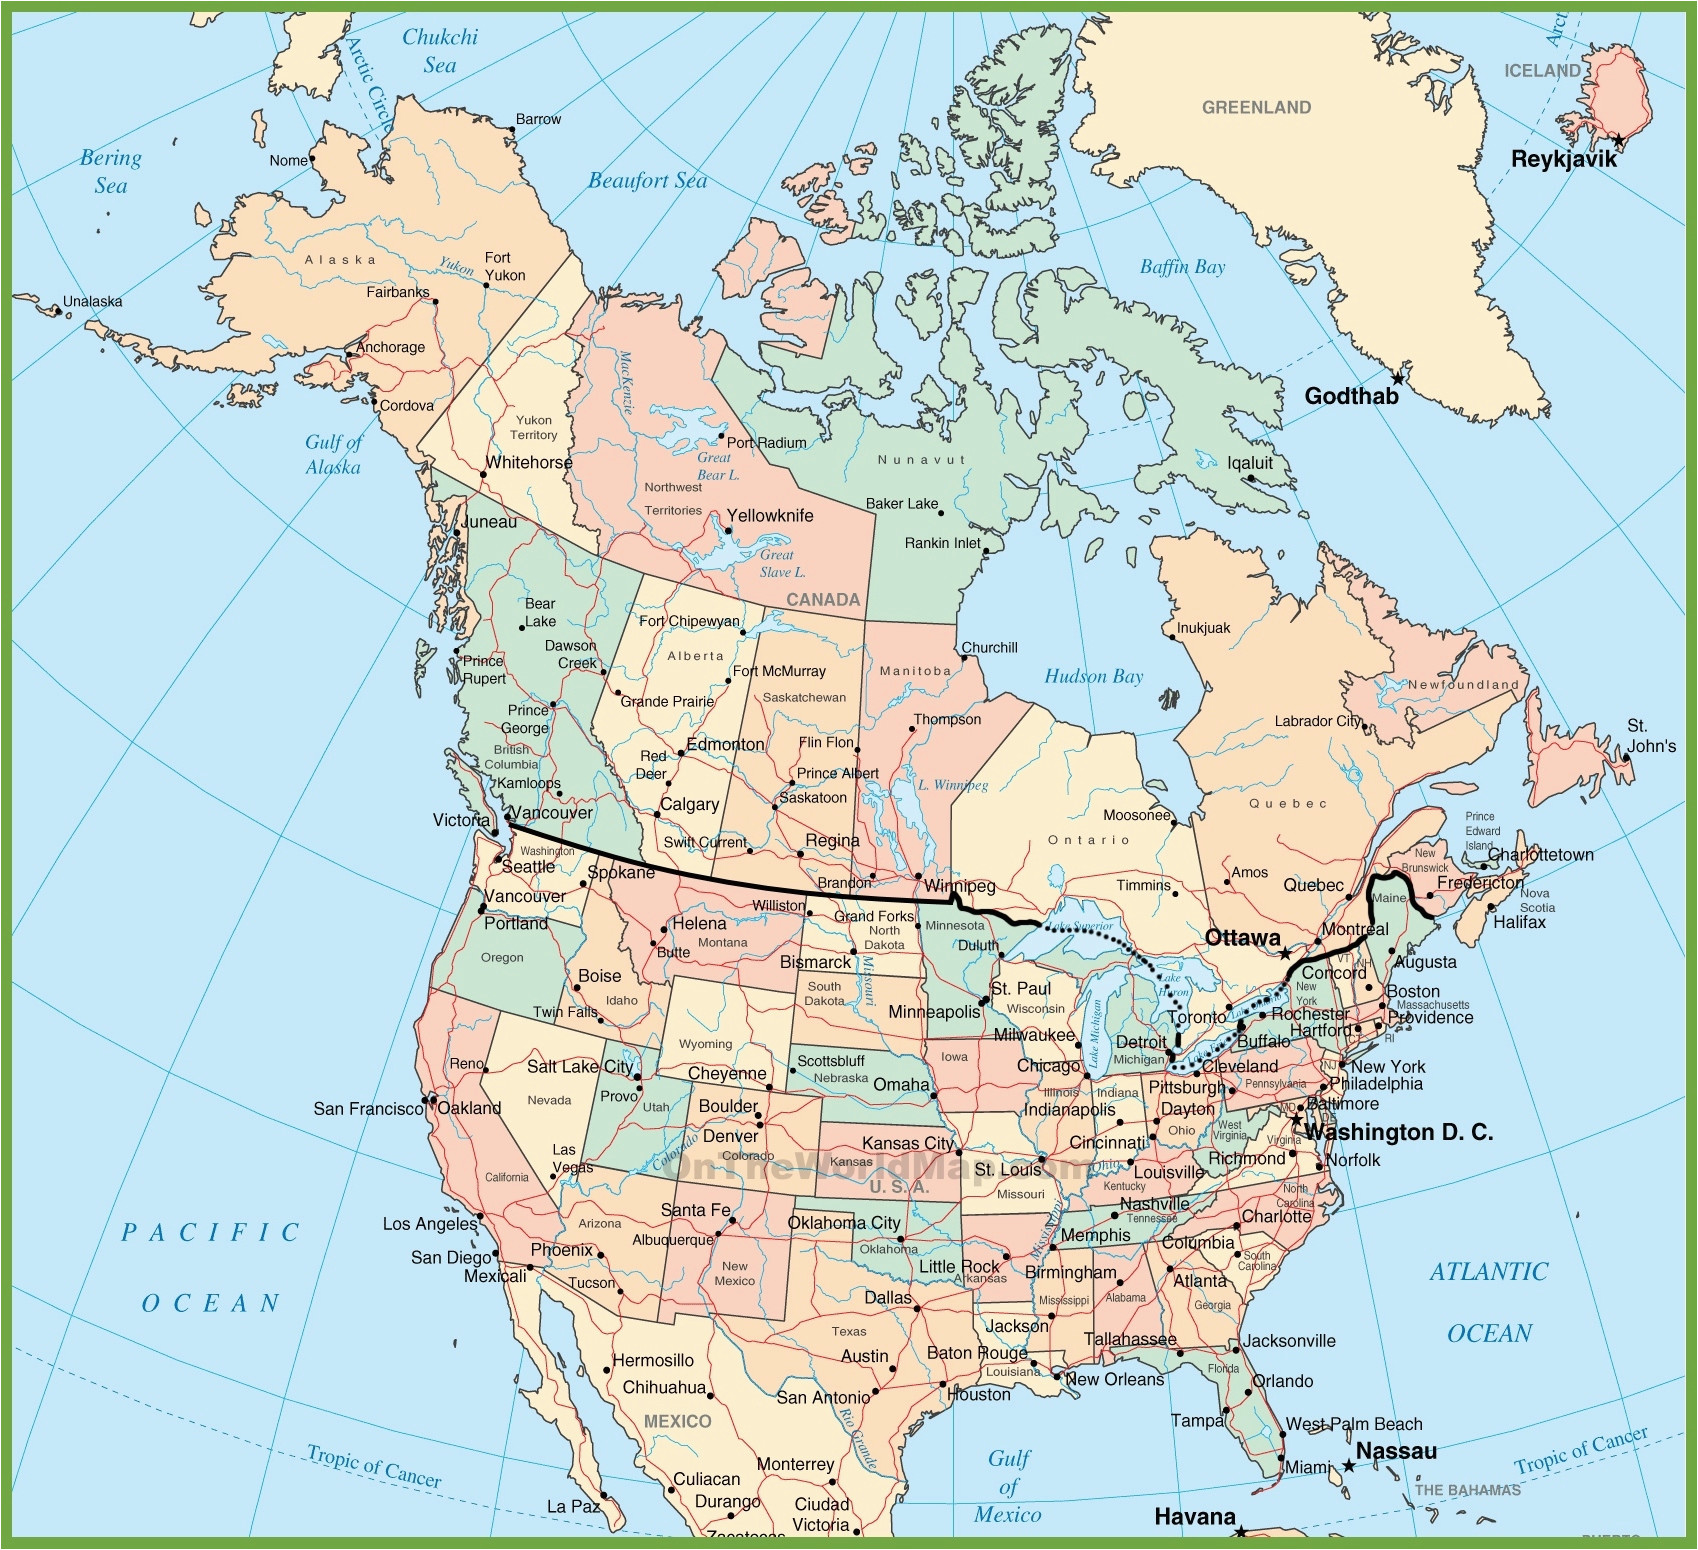 Map Of Usa and Canada with States and Provinces Usa and Canada Map